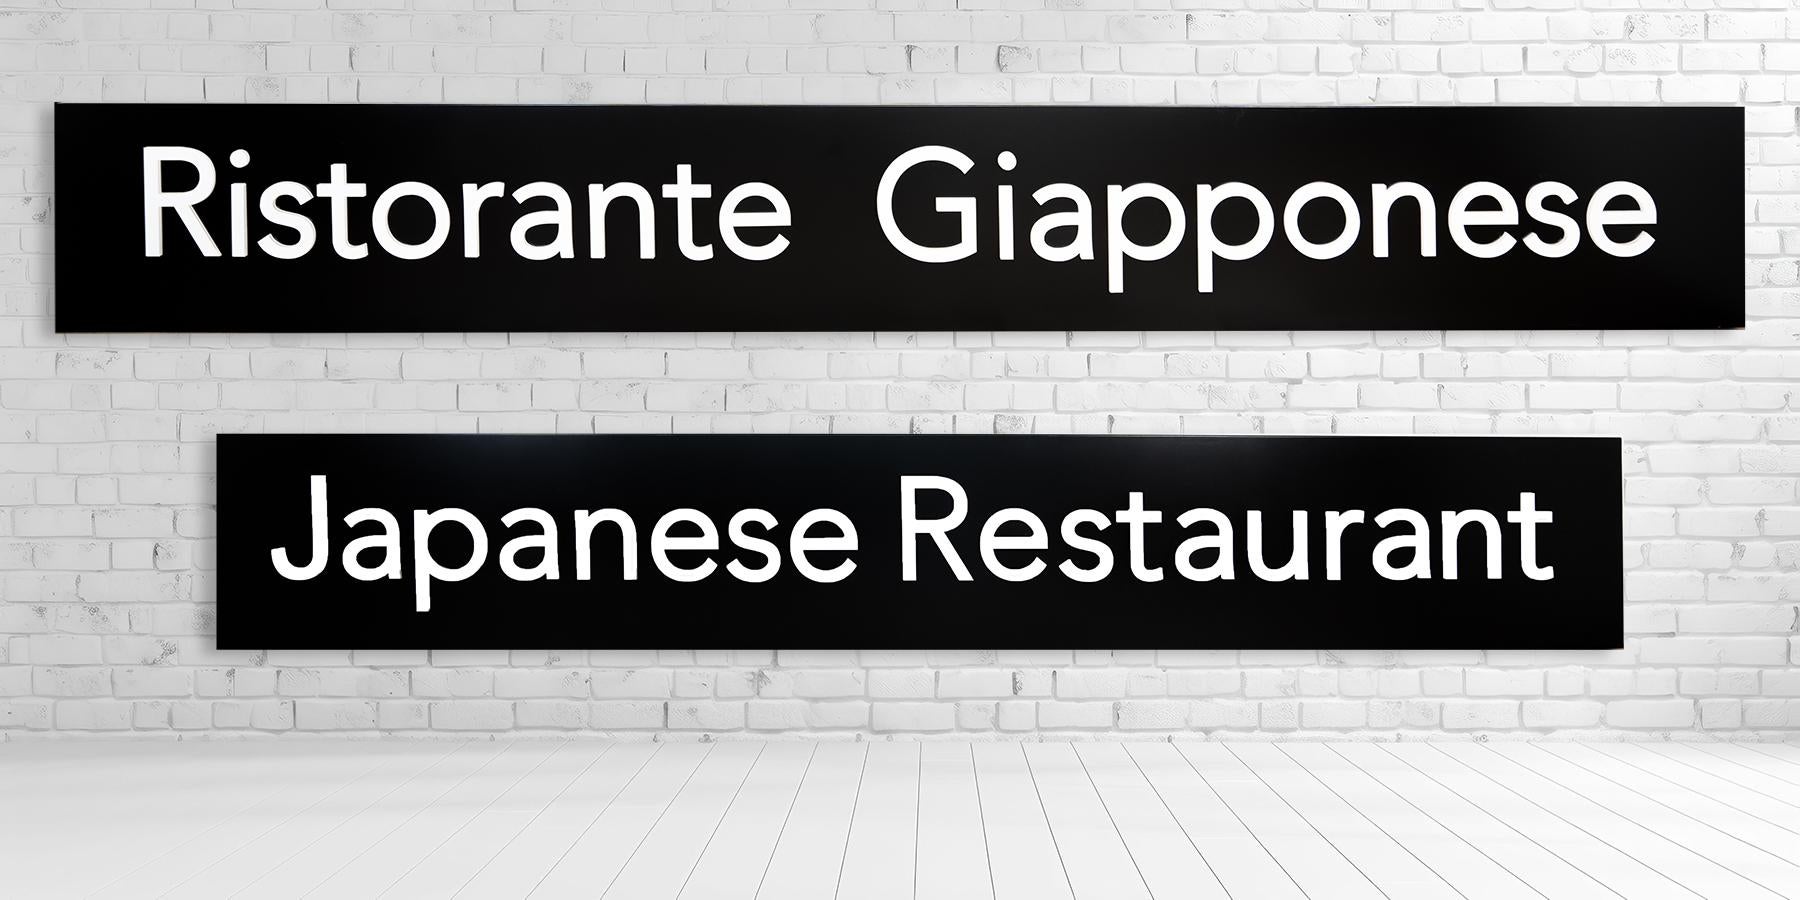 Black painted Led lighted signs with Plexiglas lettering.
For display, like new
H60 x W400 x D7.5 - Kg 30
H60 x W450 x D7.5 - Kg 40
Modernist Style
Periodo del design 1990 - 1999
Production period 1990 - 1999
Year of manufacture 2000
Country of